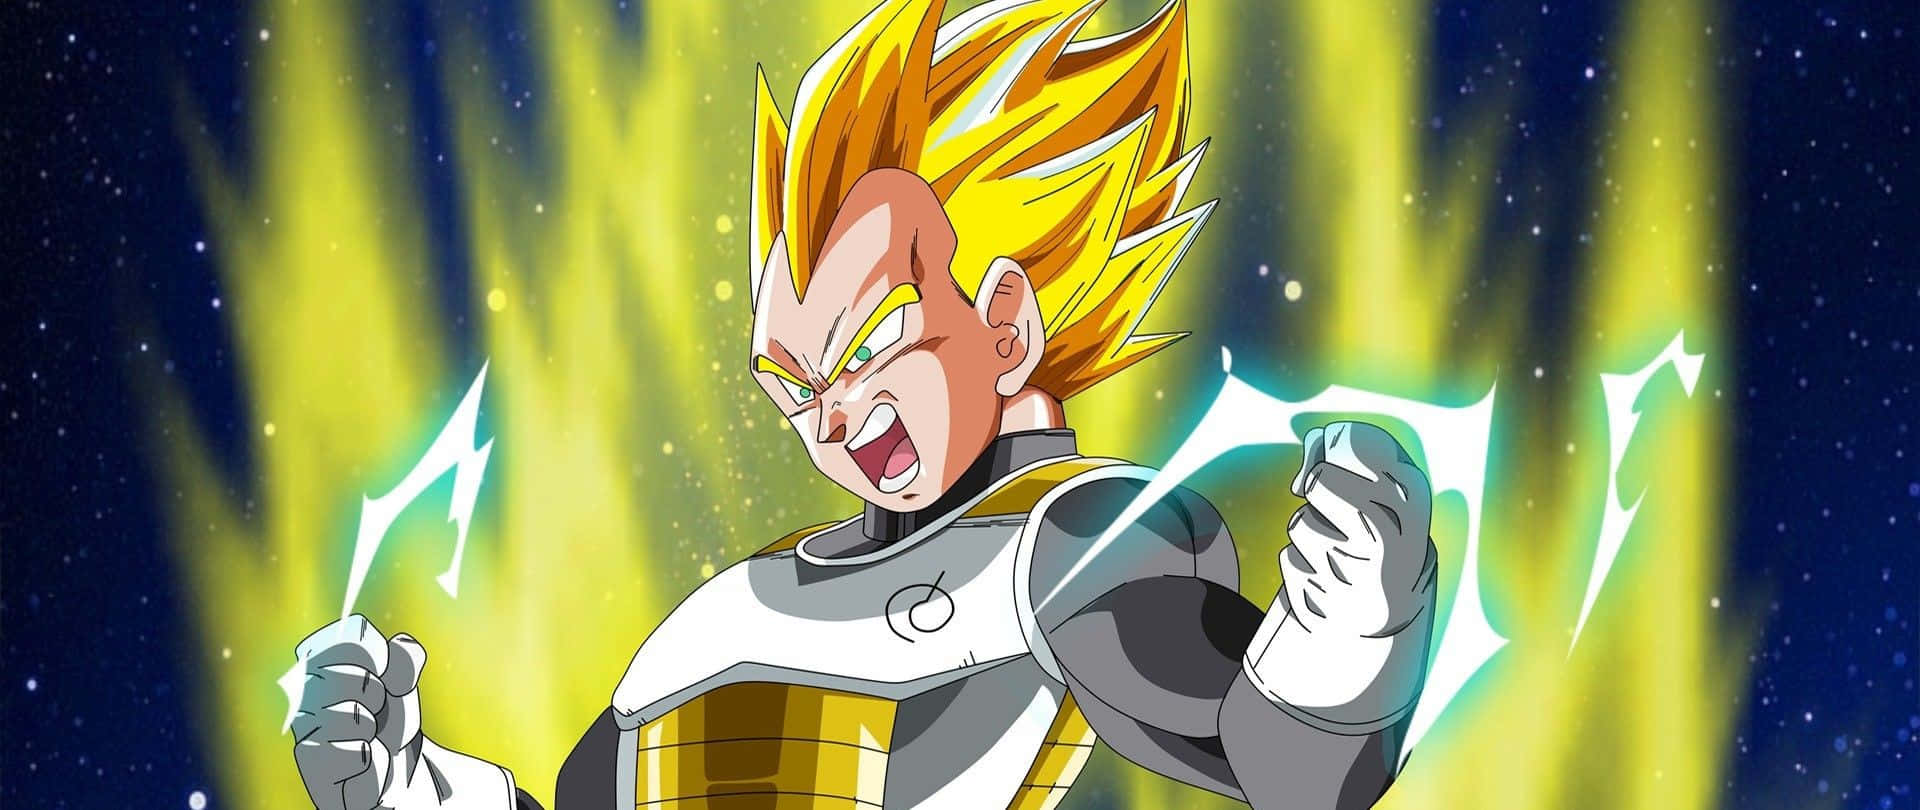 Vegeta Super Saiyan unleashes his power in a thrilling display of strength and determination. Wallpaper